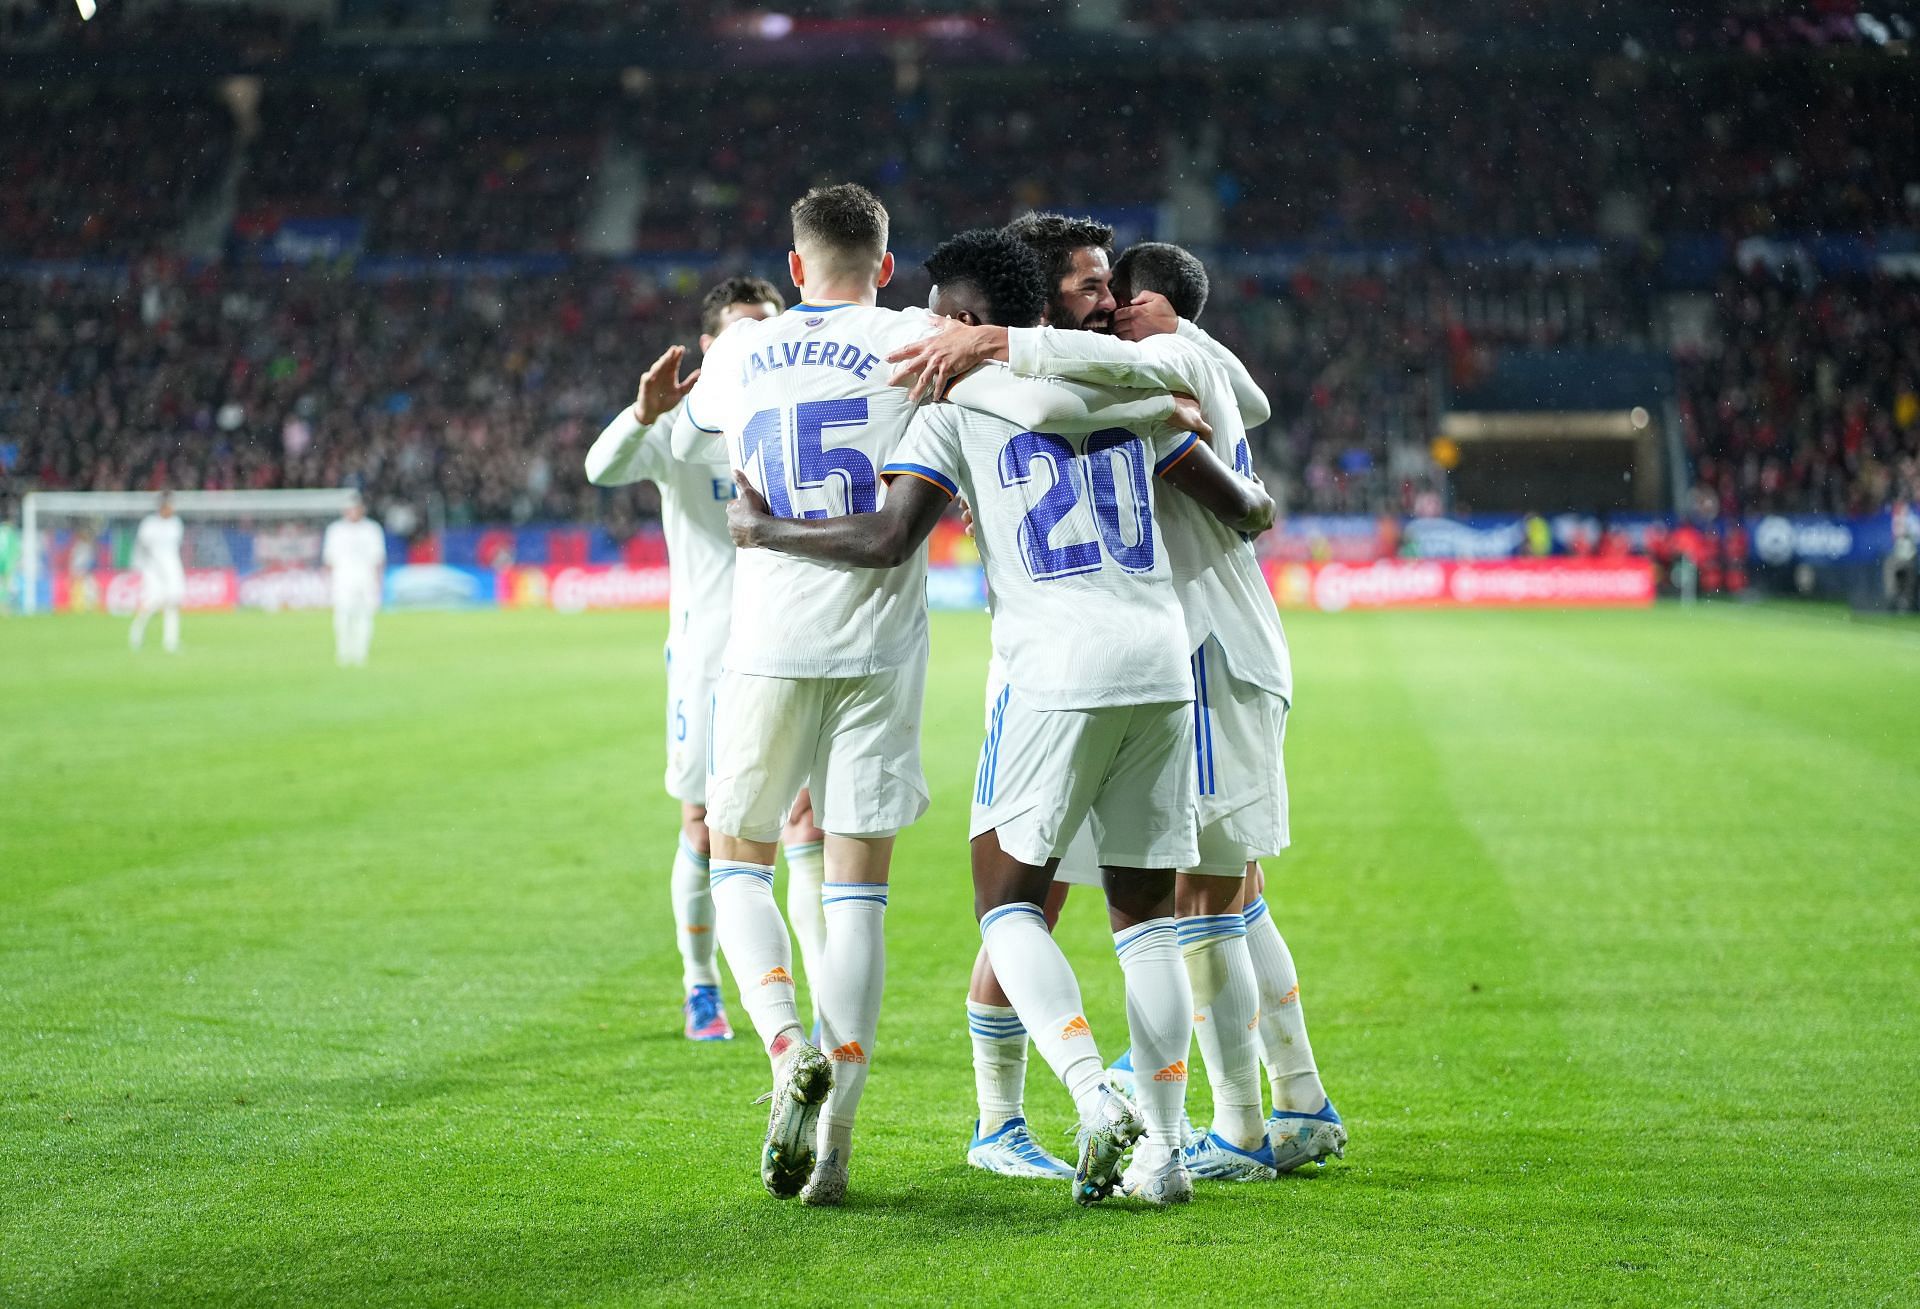 Madrid players celebrate after scoring a goal